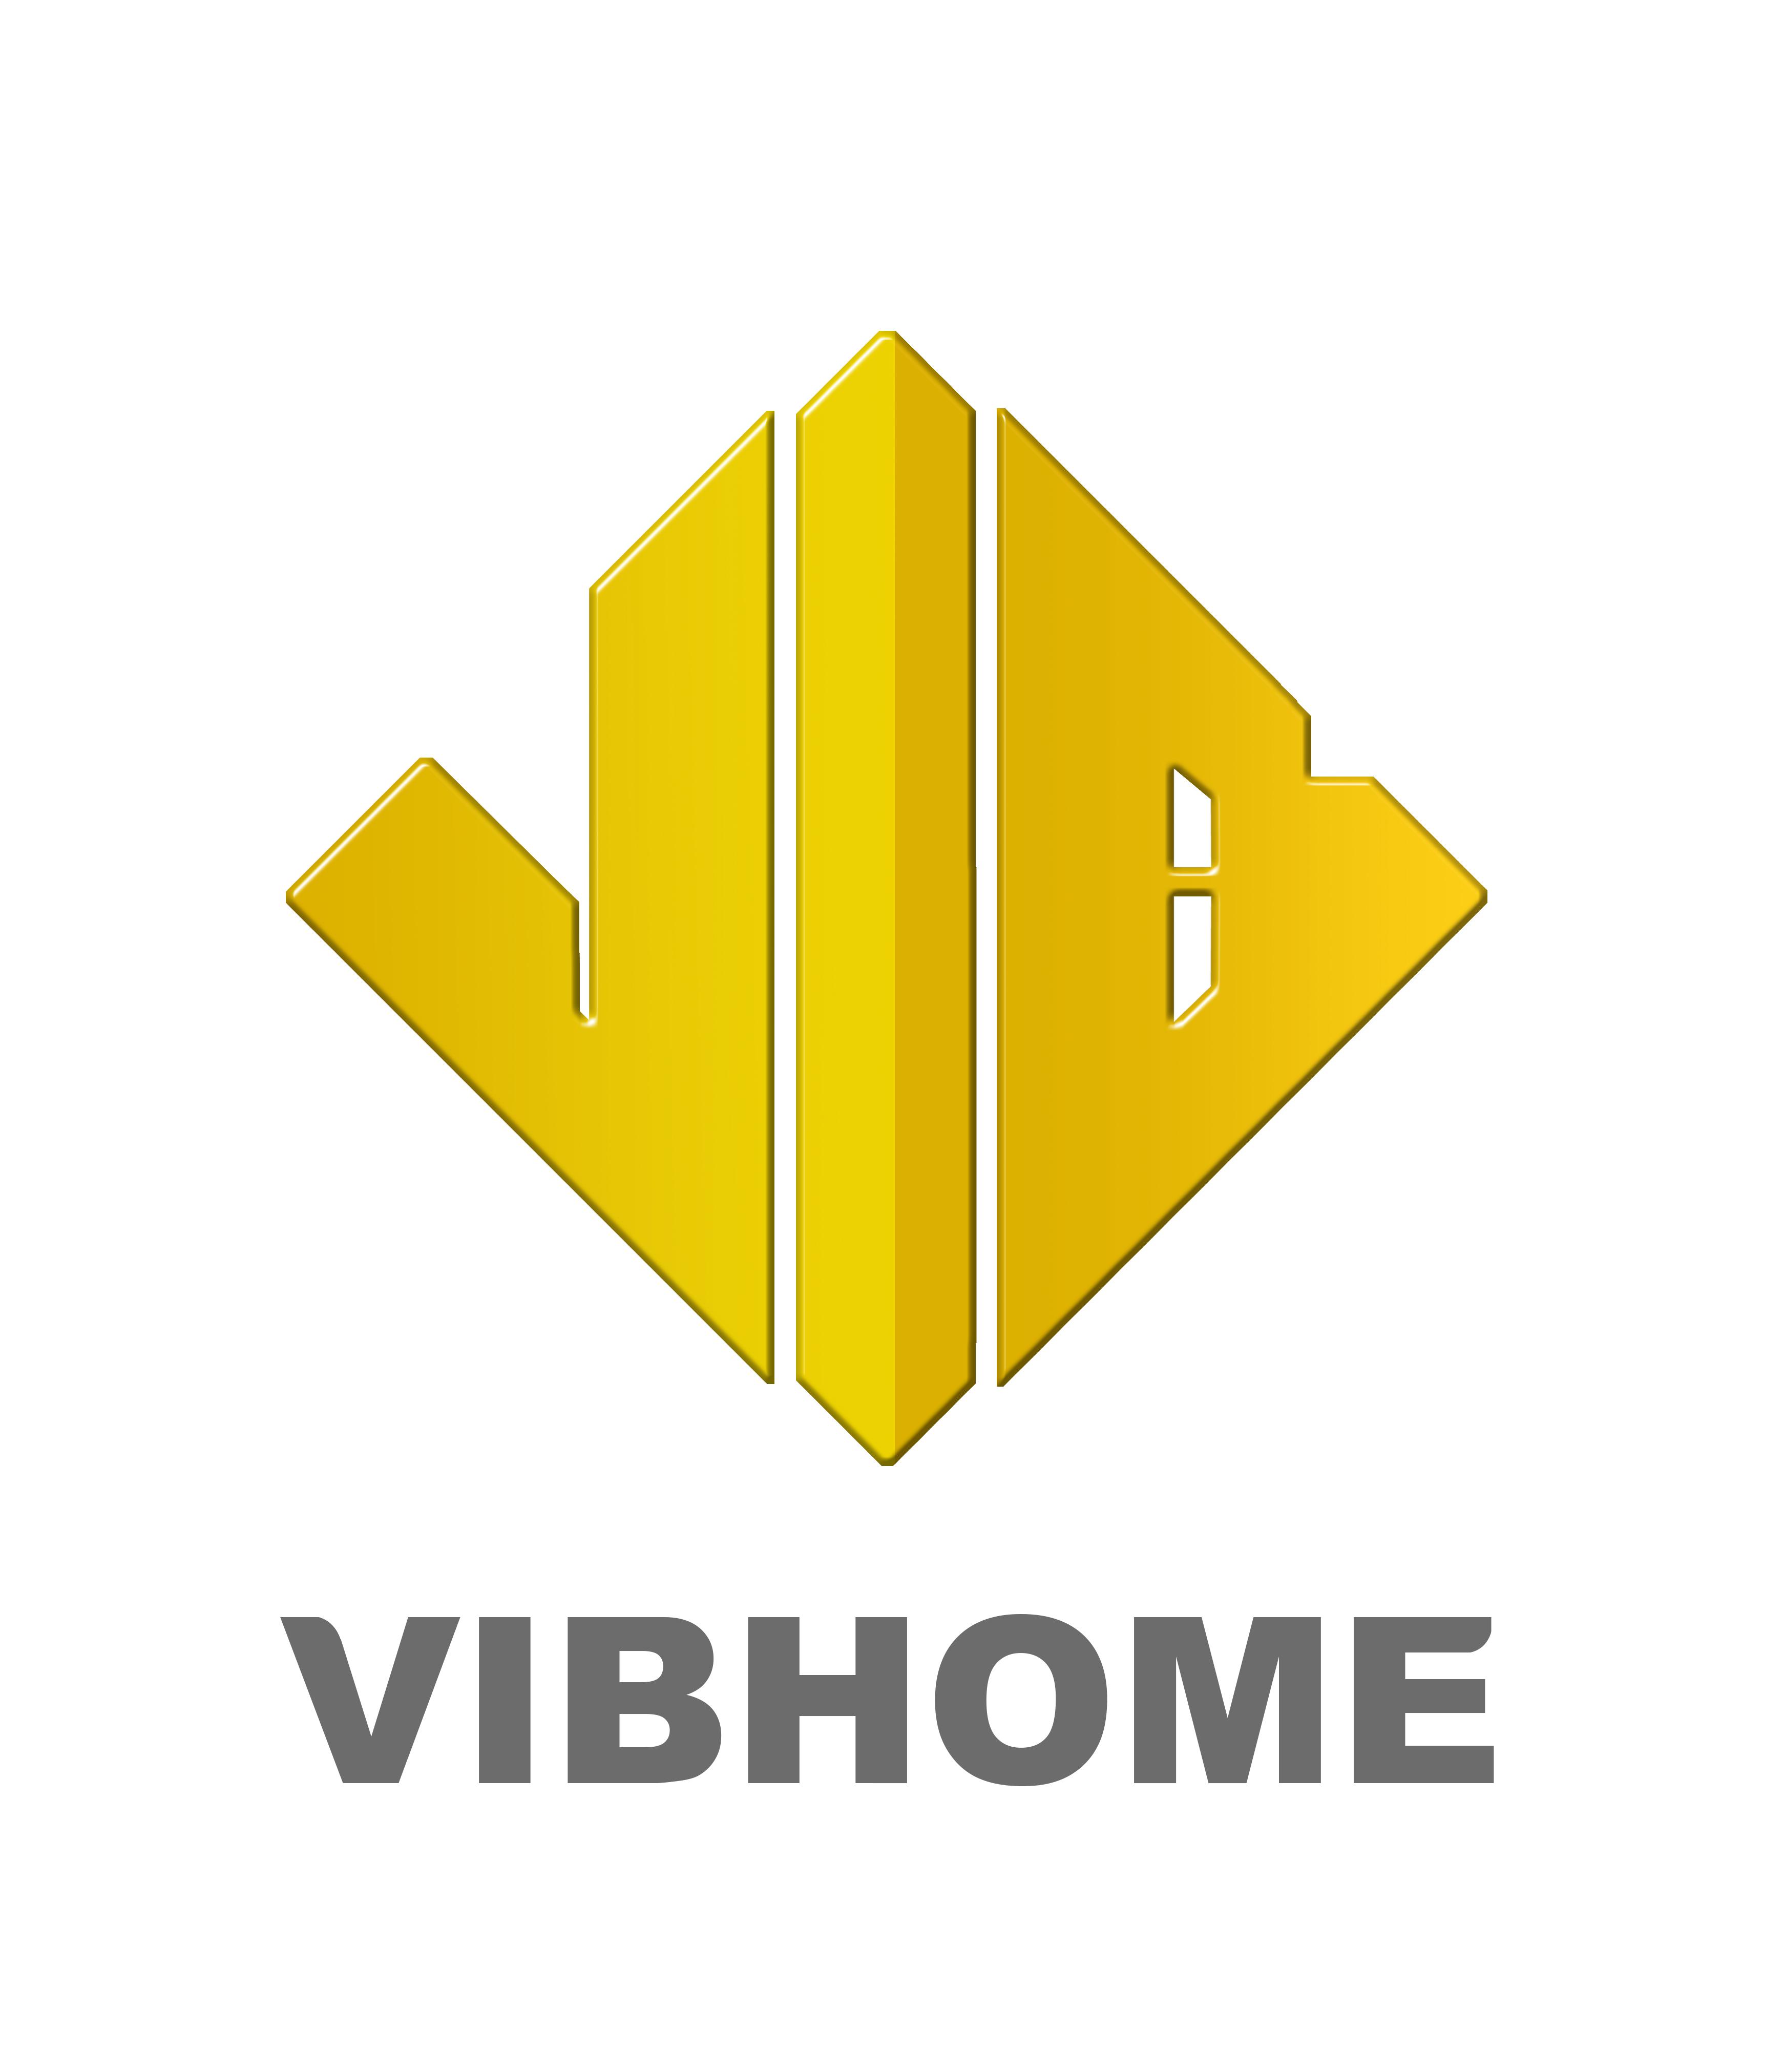 VIBHOME CONSTRUCTION AND ARCHITECTURAL JOINT STOCK COMPANY